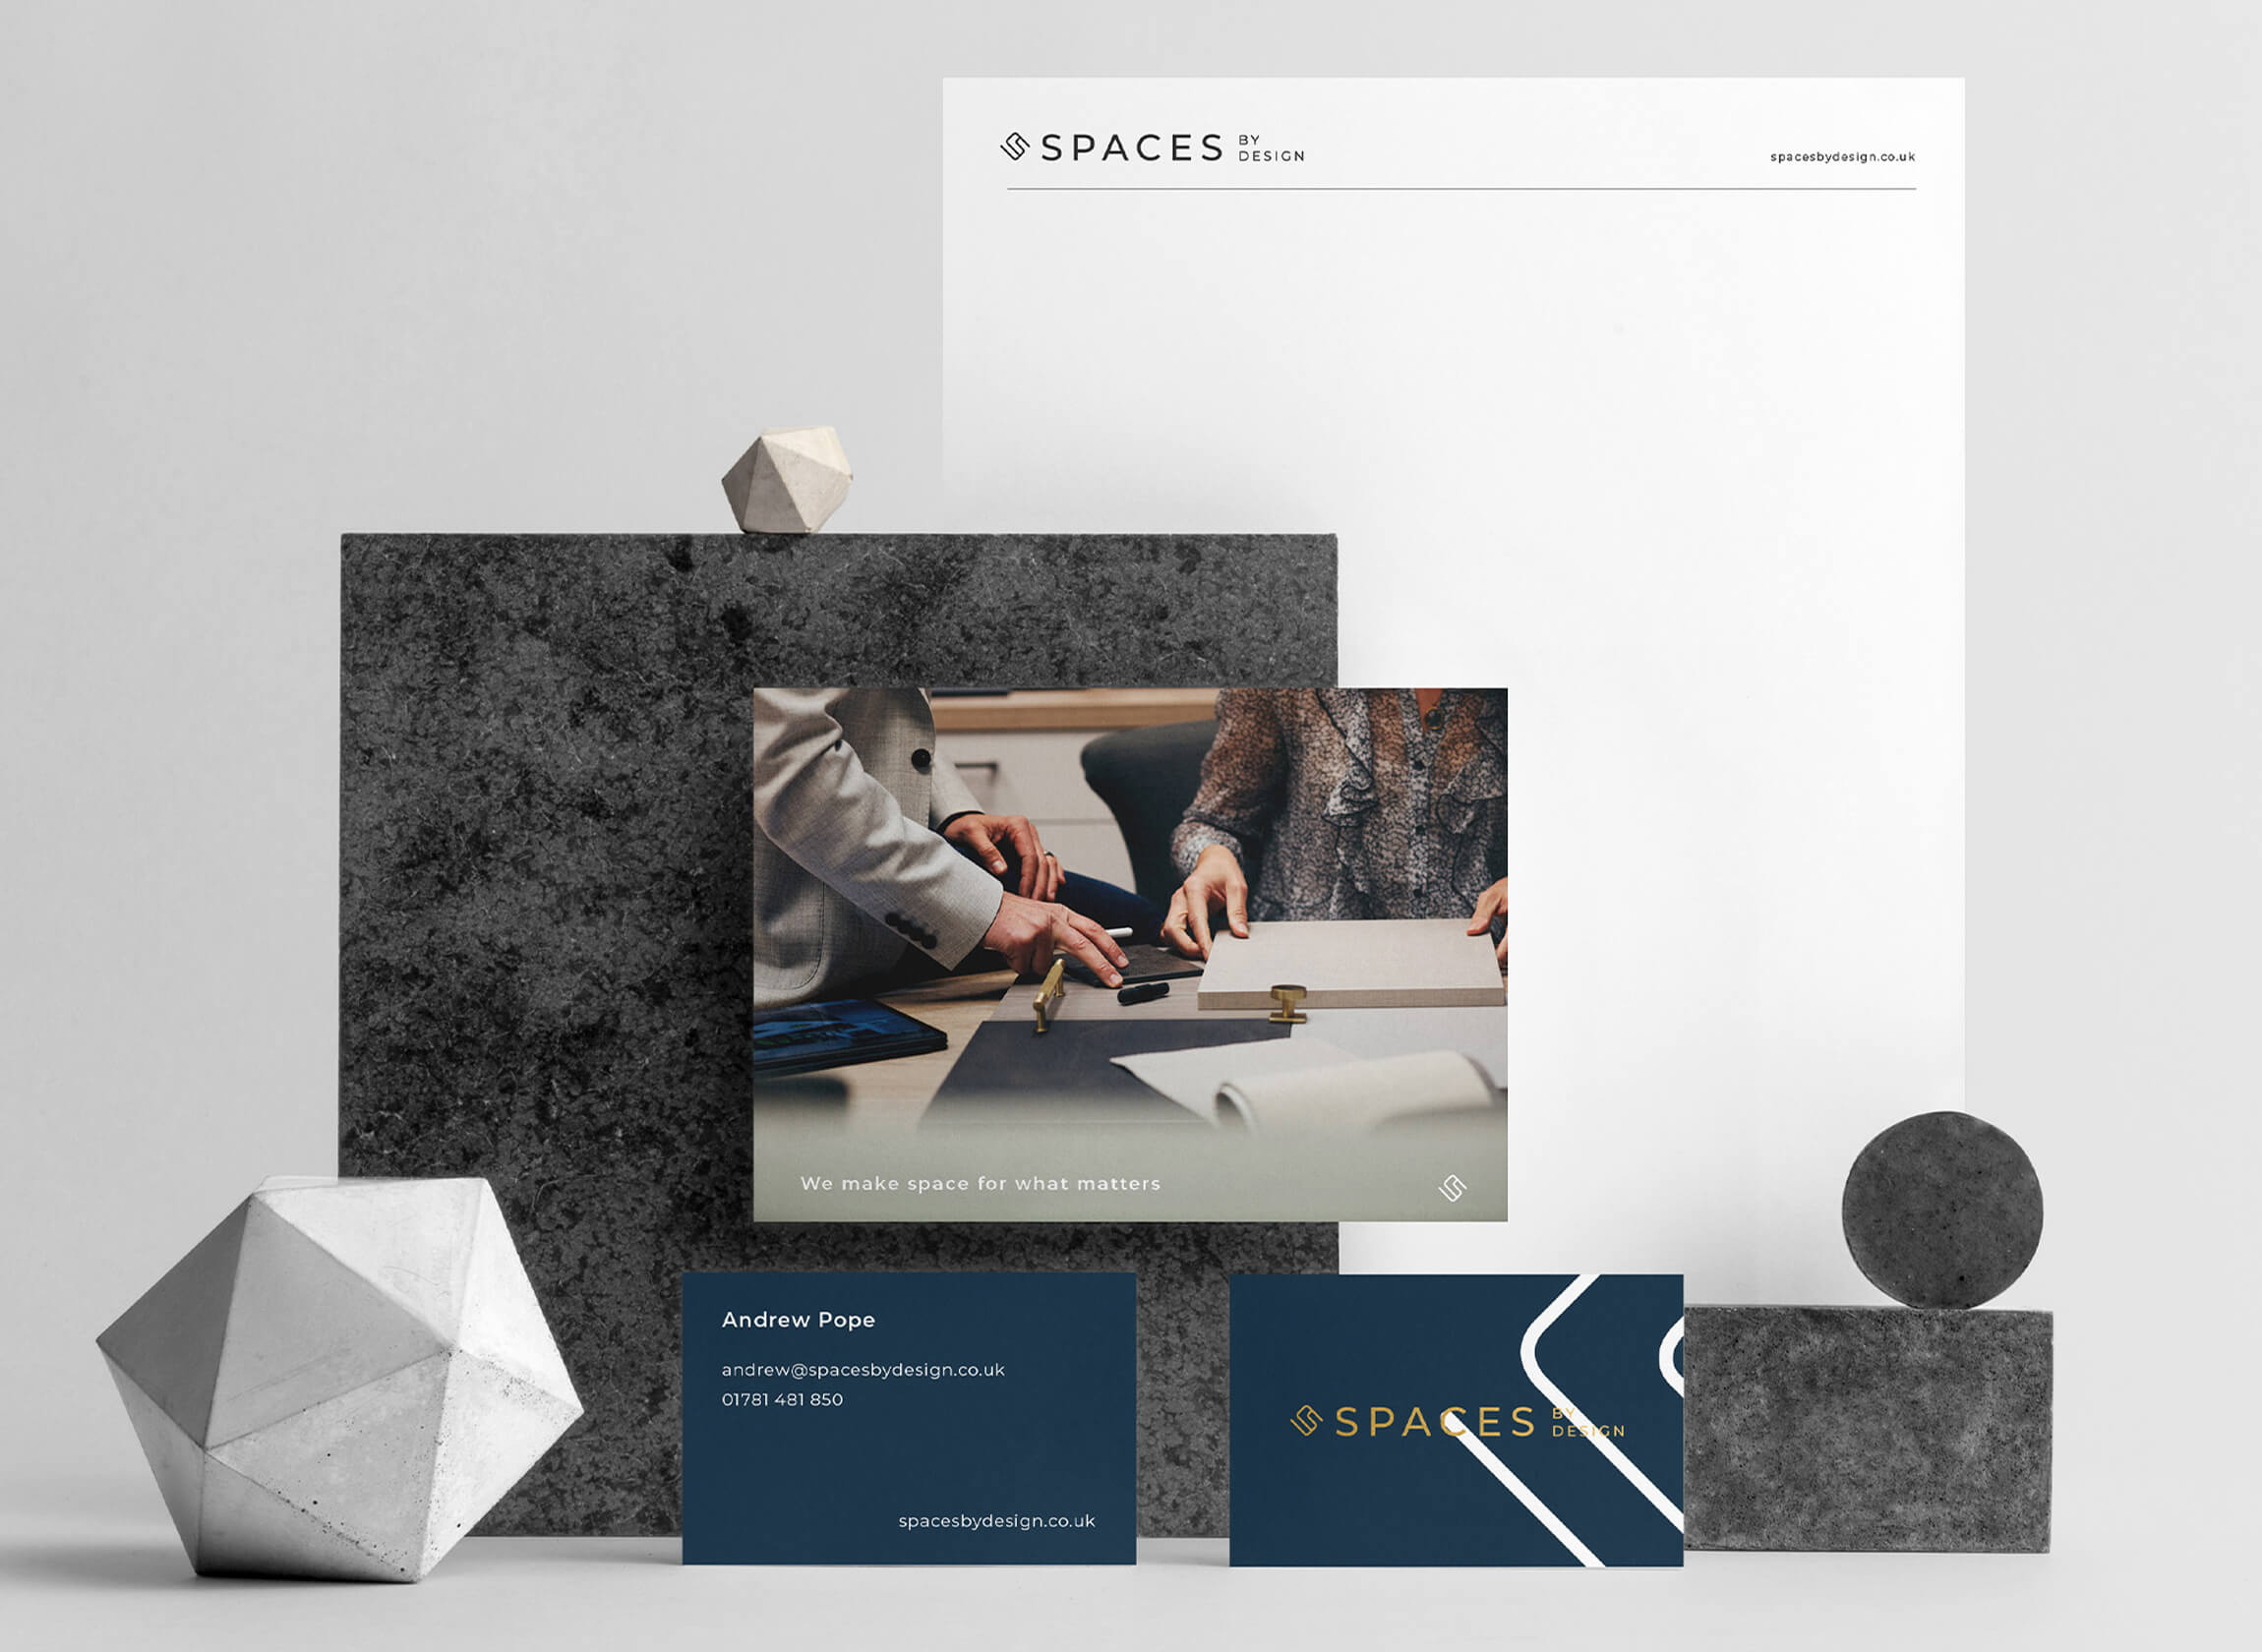 Full stationery suite design for Spaces by design